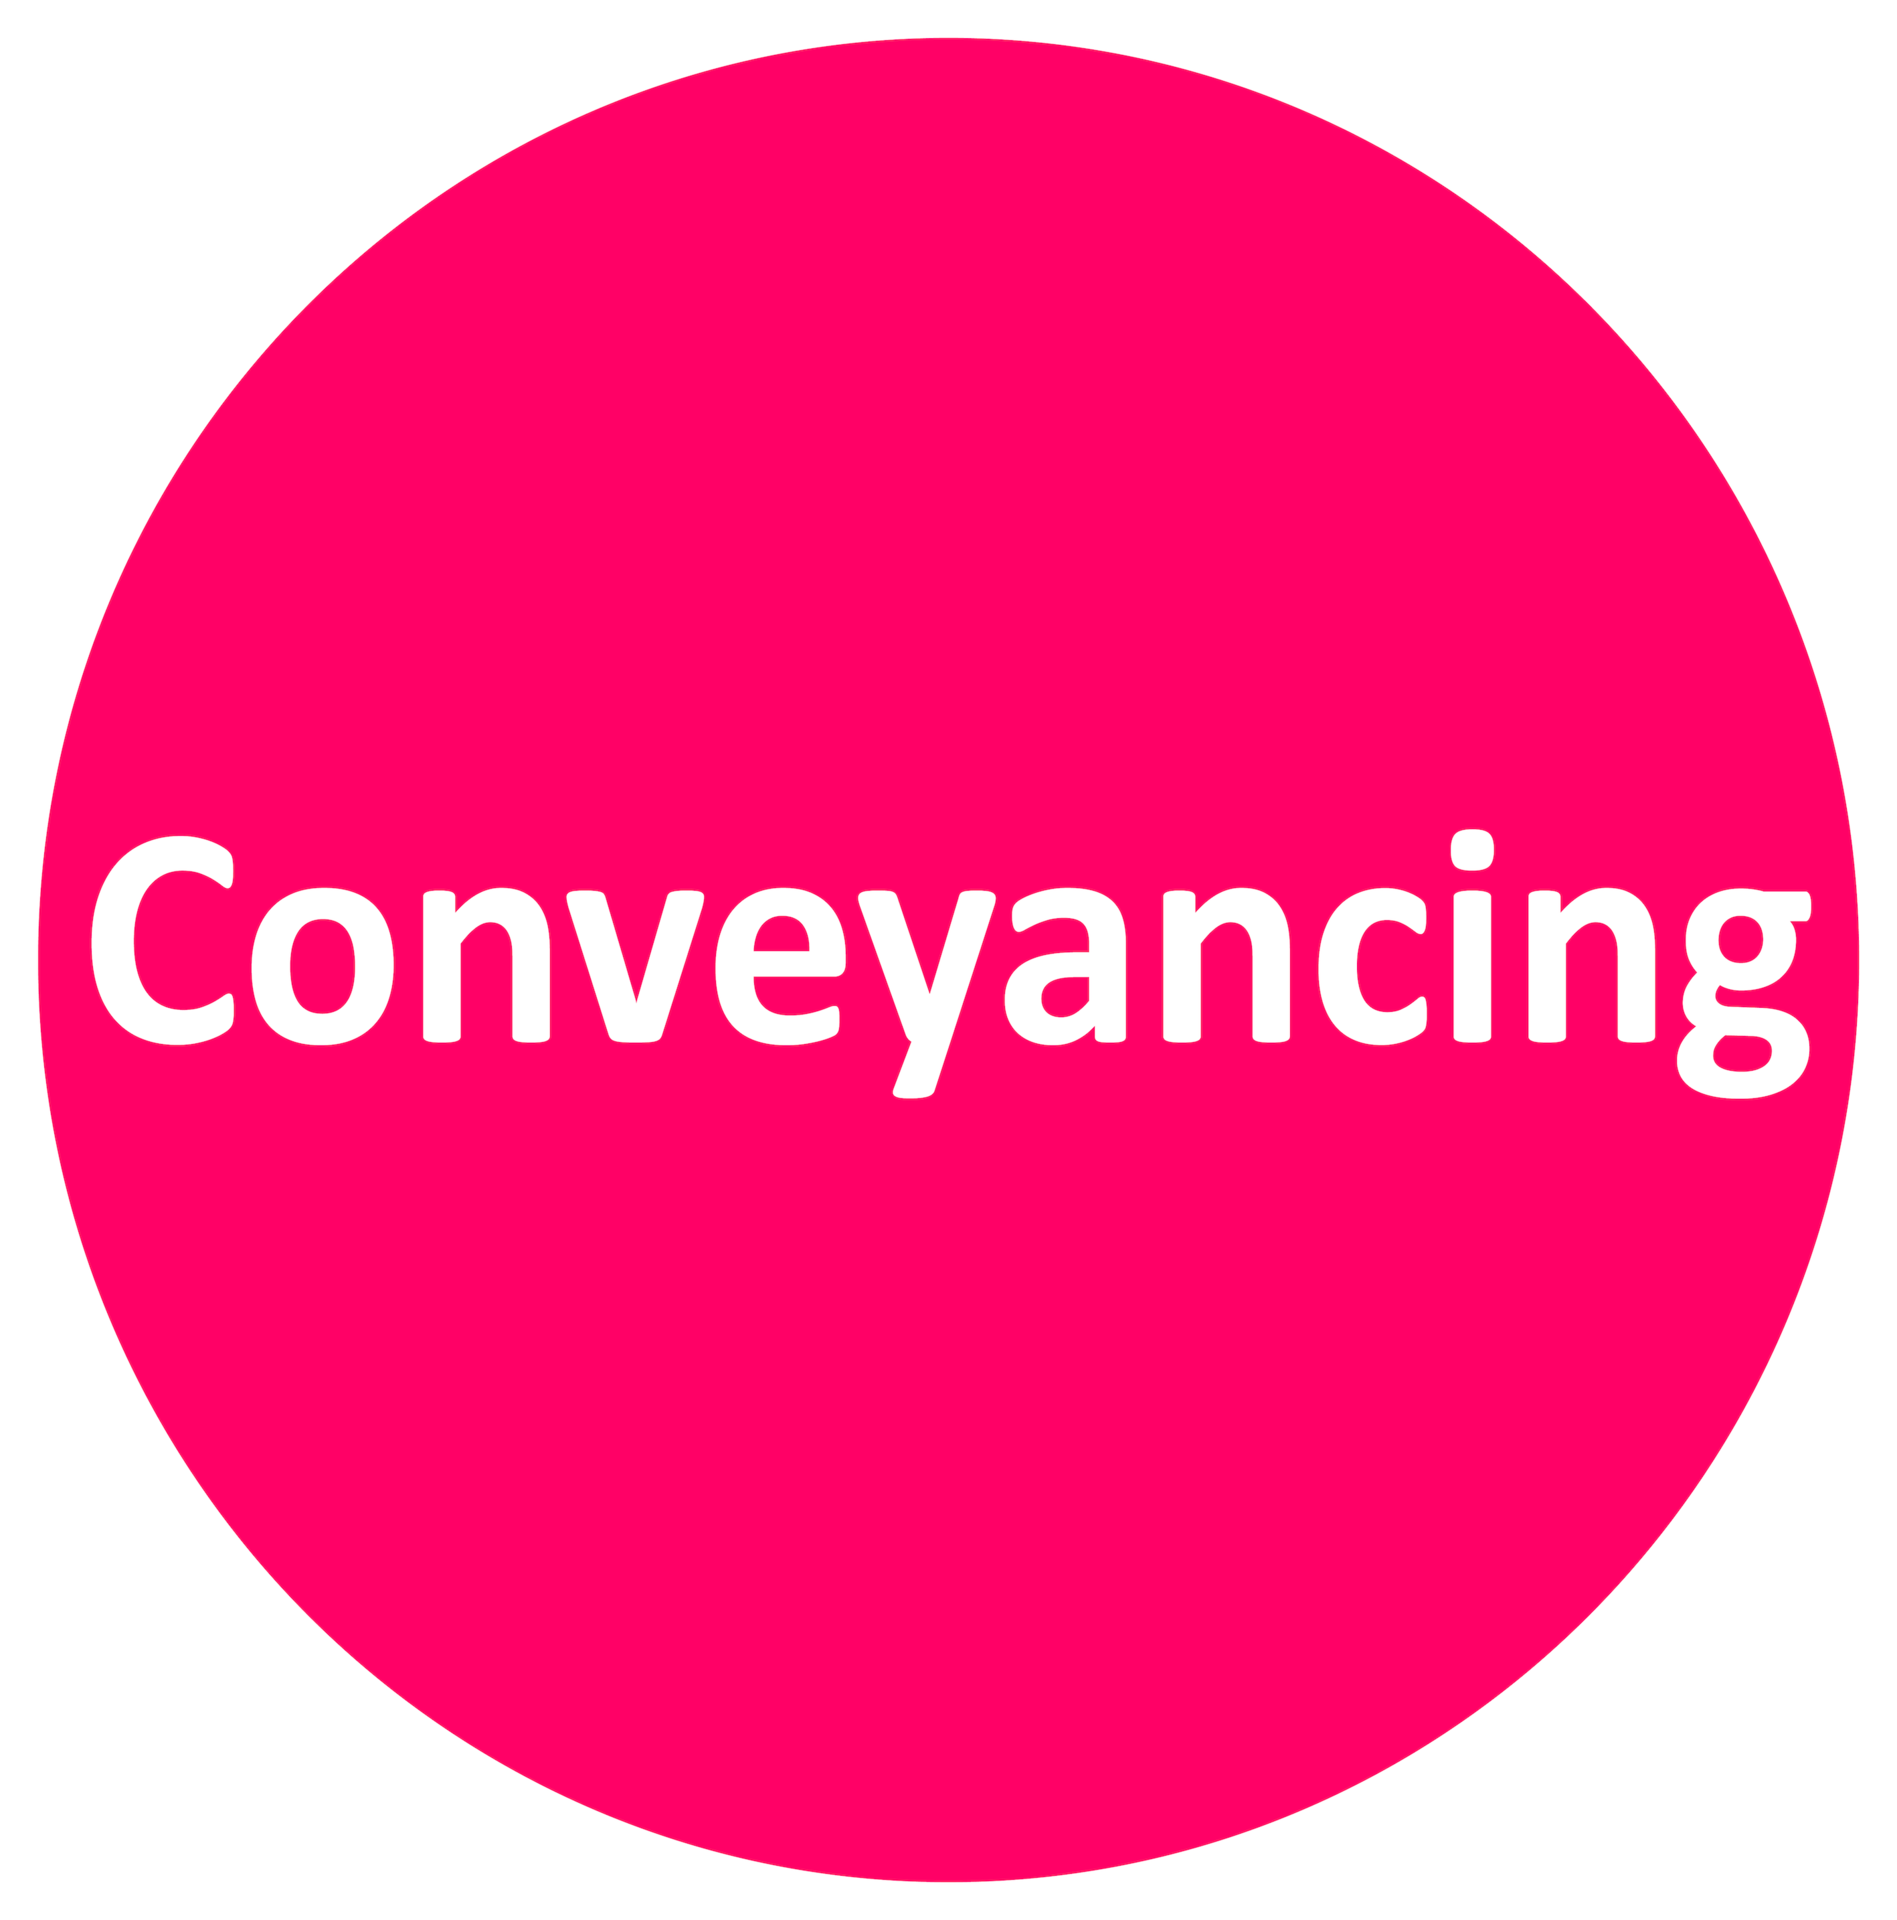 Conveyancing button to access Conveyancing page